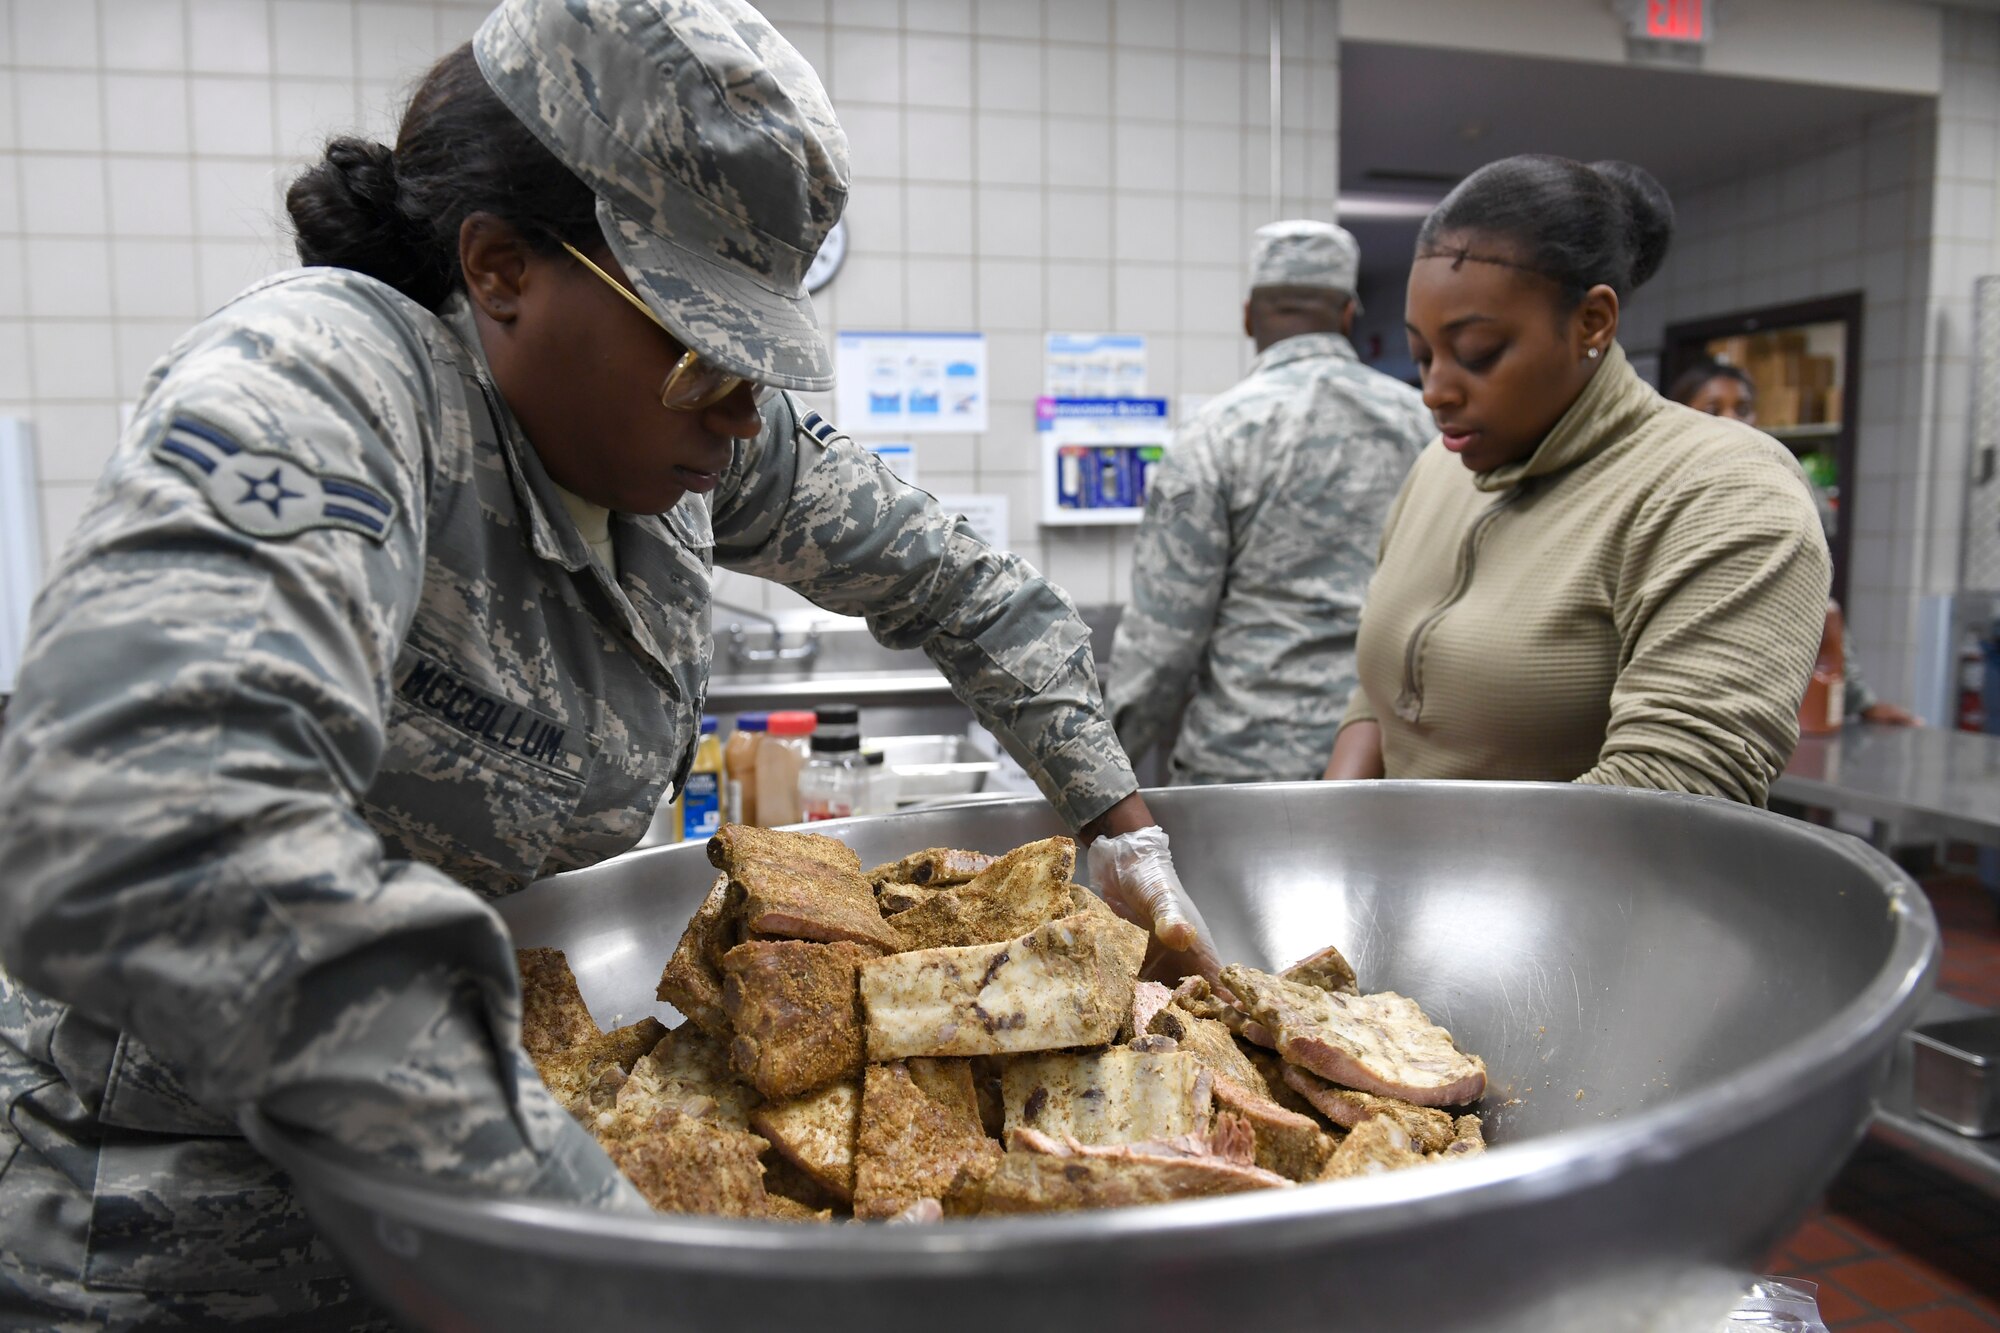 U.S. Air Force Airman 1st Class Pachea McCollum (left), 914th Air Refueling Wing, prepares lunch in the dining facility during drill weekend at the North Carolina Air National Guard Base, Charlotte Douglas International Airport, Jan. 12, 2019. Food services Airmen from the North Carolina Air National Guard train members from the Niagara Falls Air Reserve Station, New York, on full-service kitchen operations in preparation for the upcoming Air Force active duty and reserve Hennessy Award competition.